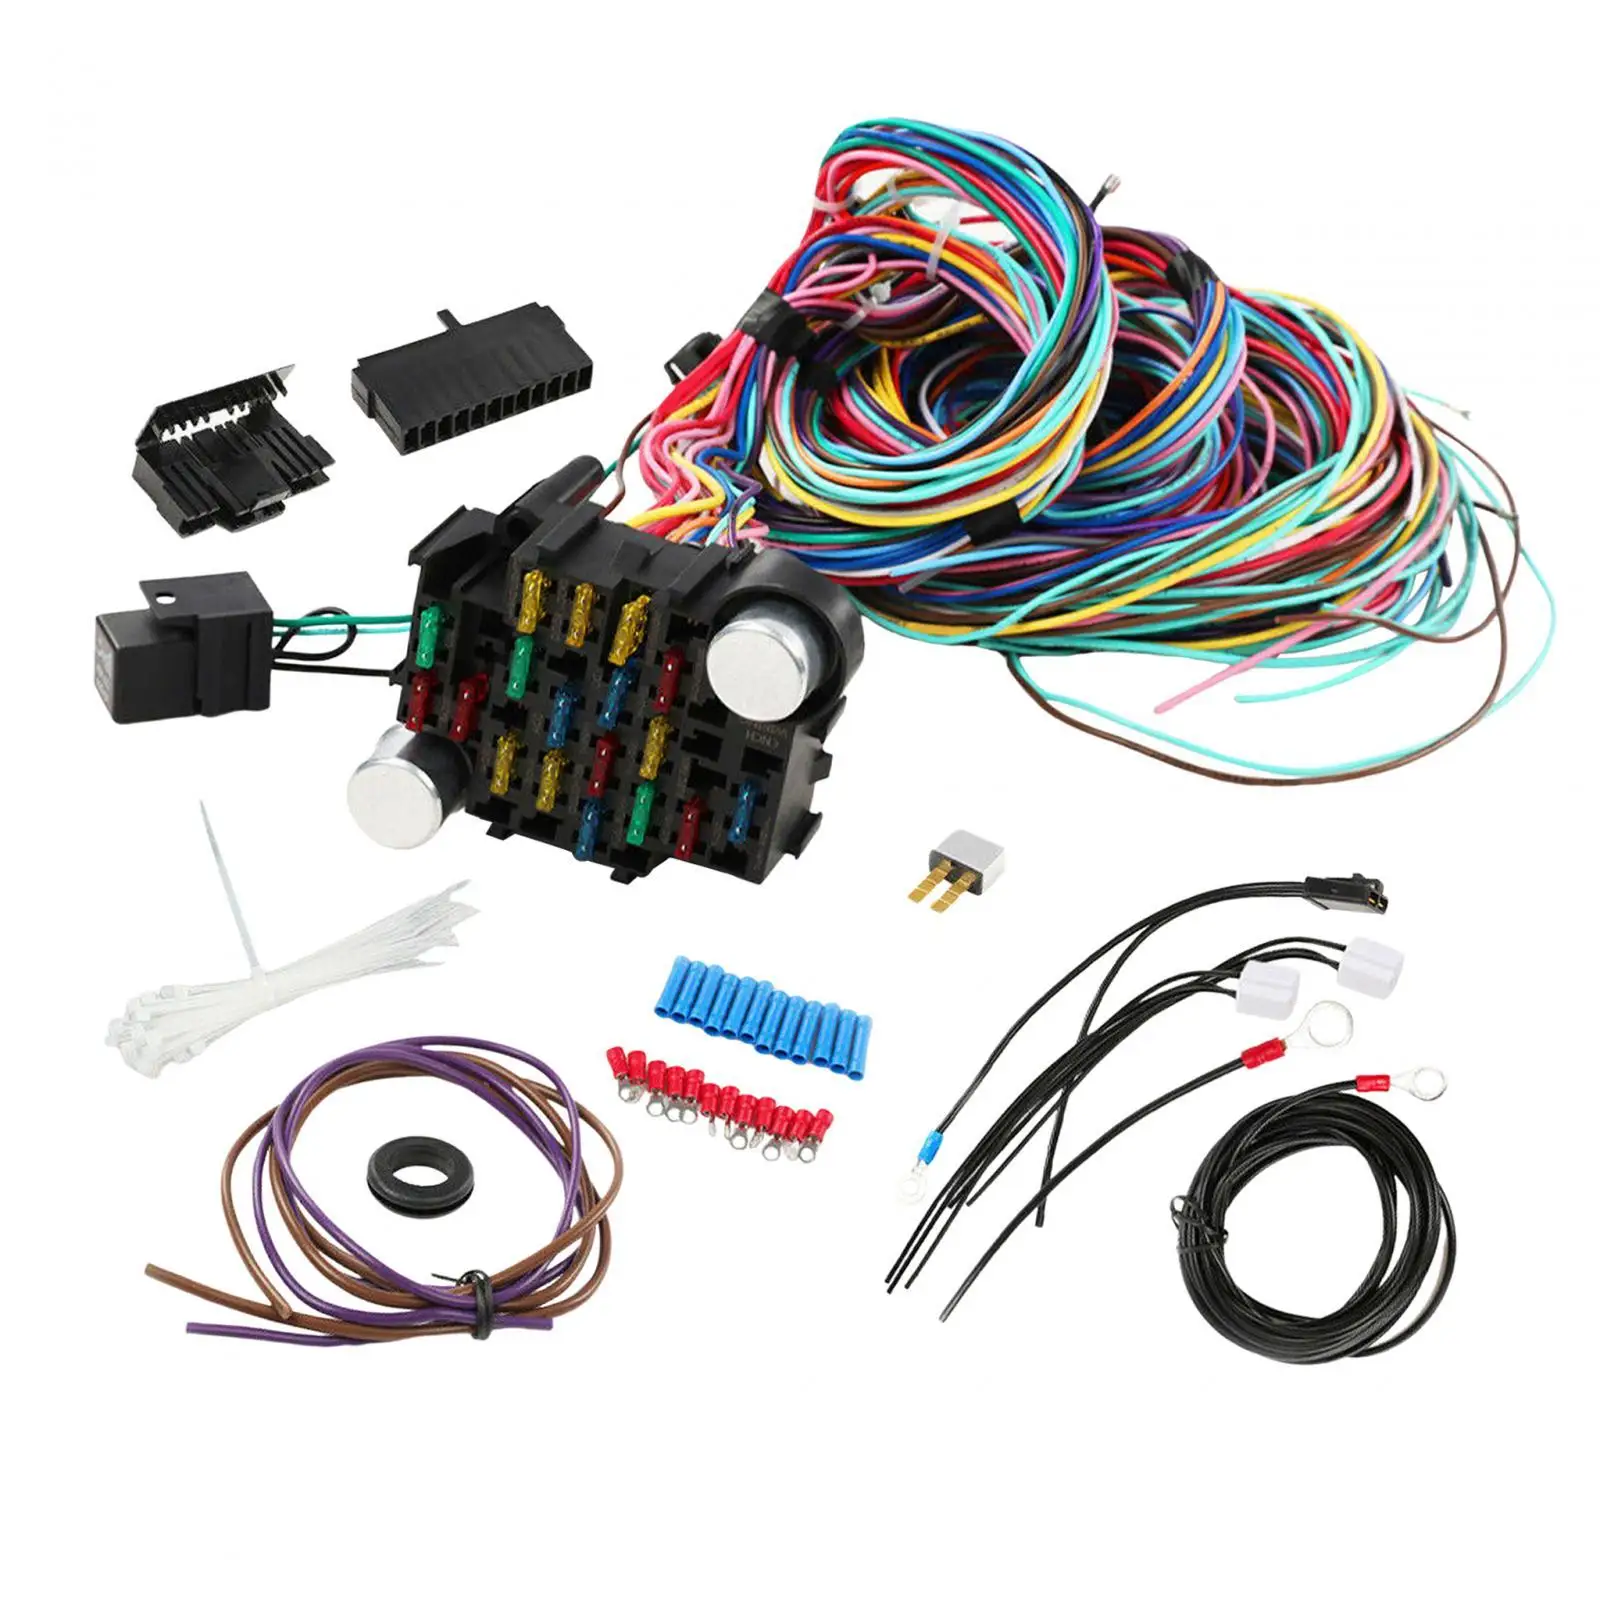 Universal Wiring Harness Kit Parts Extra Long Wires Stable Performance Direct Replaces 21 Circuit Wiring Harness for Car